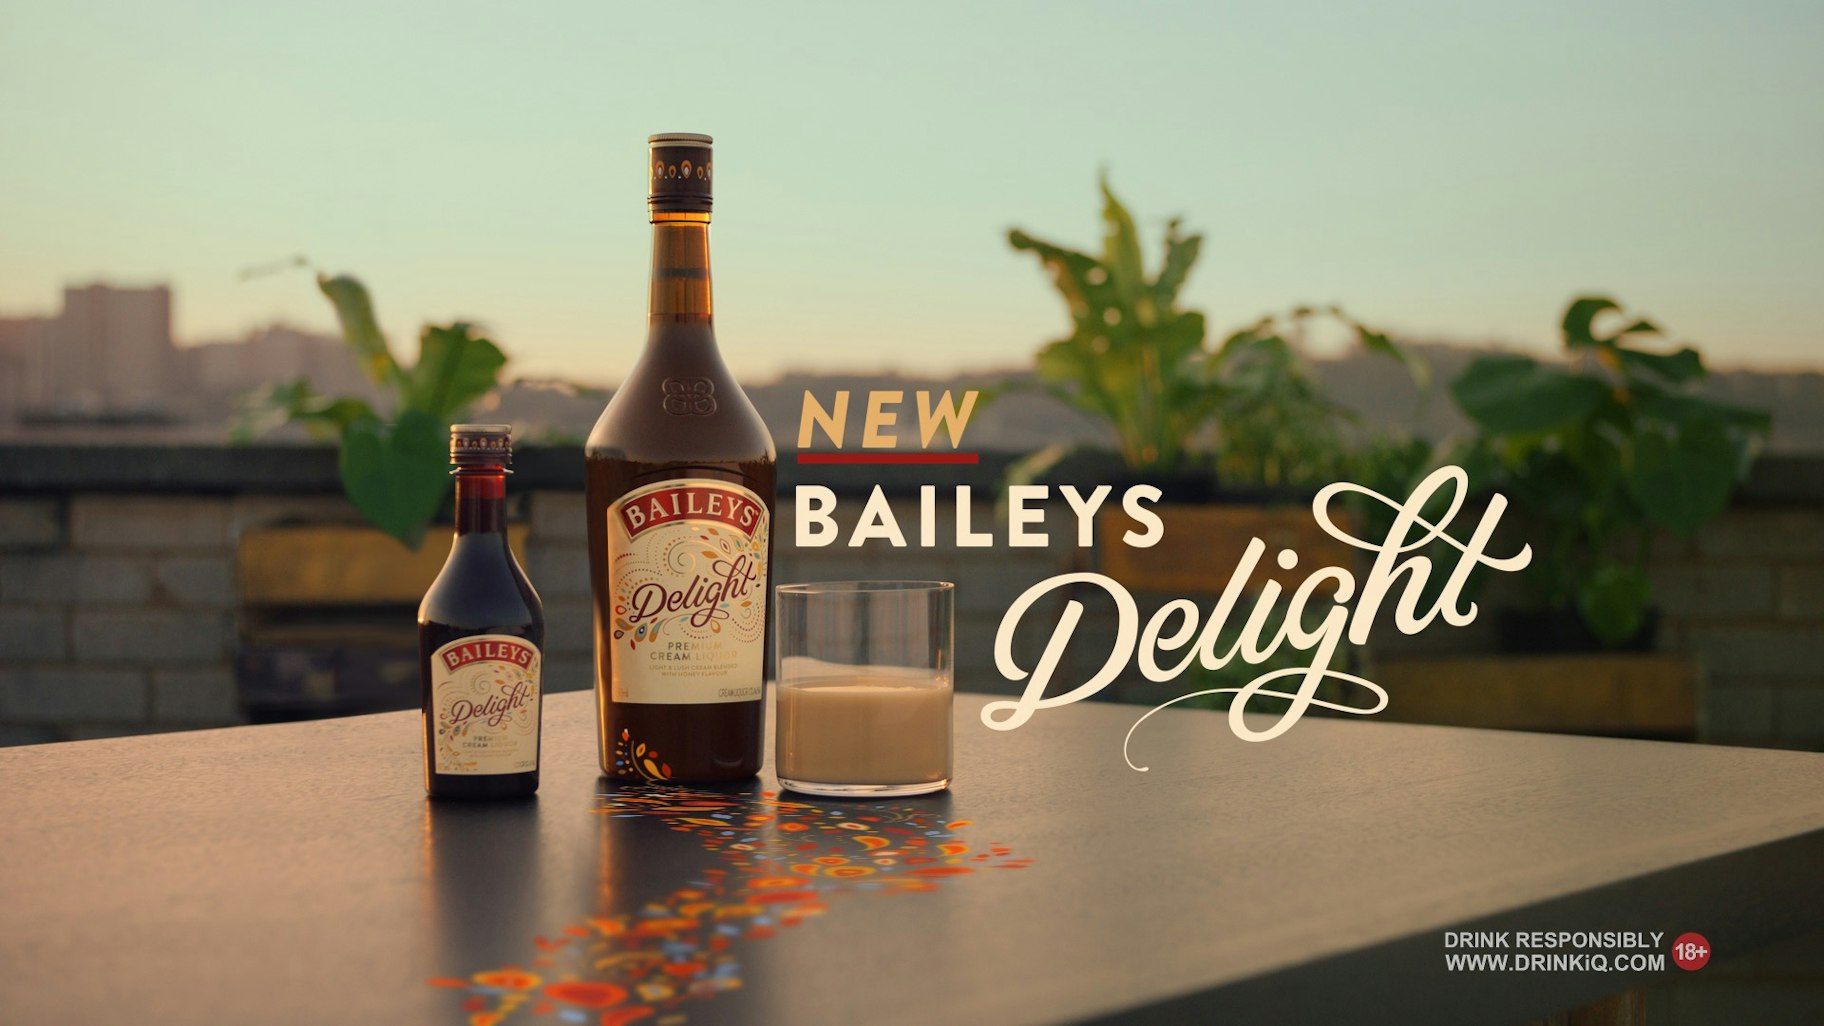 Baileys Delight - Begin the End of the Day -